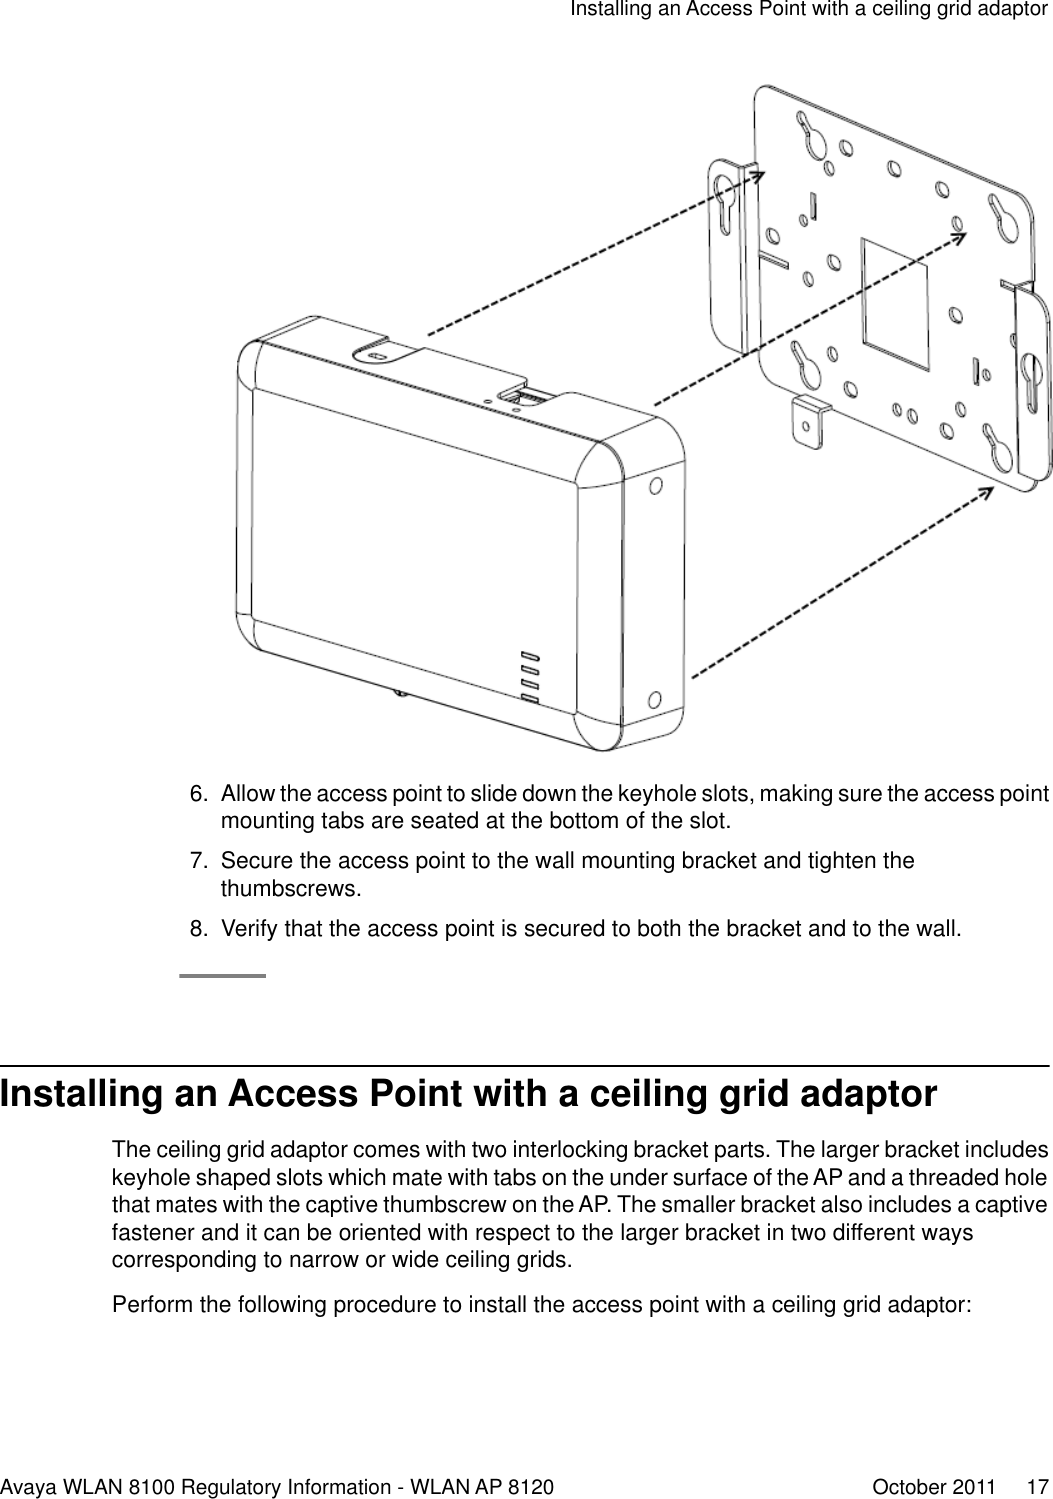 6. Allow the access point to slide down the keyhole slots, making sure the access pointmounting tabs are seated at the bottom of the slot.7. Secure the access point to the wall mounting bracket and tighten thethumbscrews.8. Verify that the access point is secured to both the bracket and to the wall.Installing an Access Point with a ceiling grid adaptorThe ceiling grid adaptor comes with two interlocking bracket parts. The larger bracket includeskeyhole shaped slots which mate with tabs on the under surface of the AP and a threaded holethat mates with the captive thumbscrew on the AP. The smaller bracket also includes a captivefastener and it can be oriented with respect to the larger bracket in two different wayscorresponding to narrow or wide ceiling grids.Perform the following procedure to install the access point with a ceiling grid adaptor:Installing an Access Point with a ceiling grid adaptorAvaya WLAN 8100 Regulatory Information - WLAN AP 8120 October 2011     17